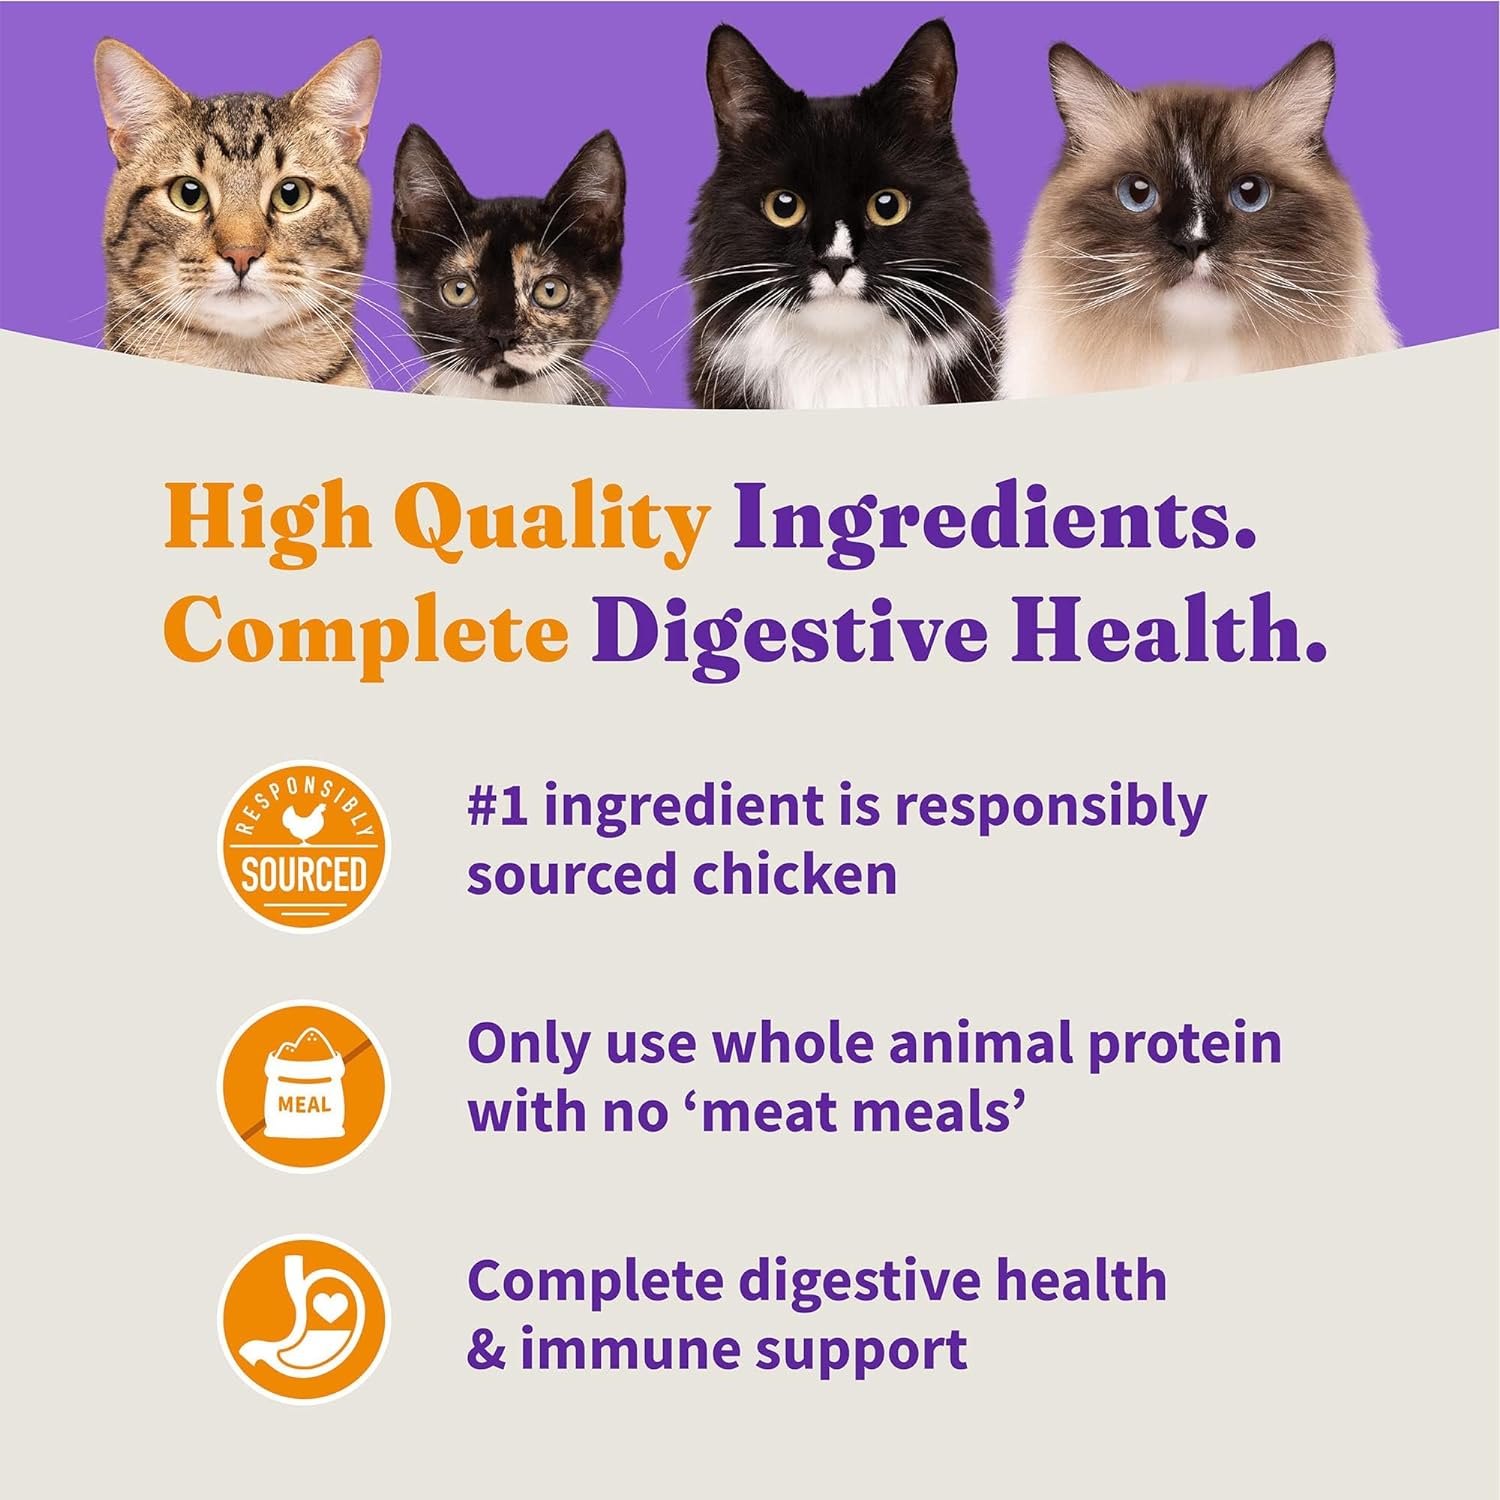 Halo Holistic Indoor Cat Food Dry, Grain Free Cage-free Chicken Recipe for healthy weight support, Complete Digestive Health, Dry Cat Food Bag, Adult Formula, 6-lb Bag : Pet Supplies